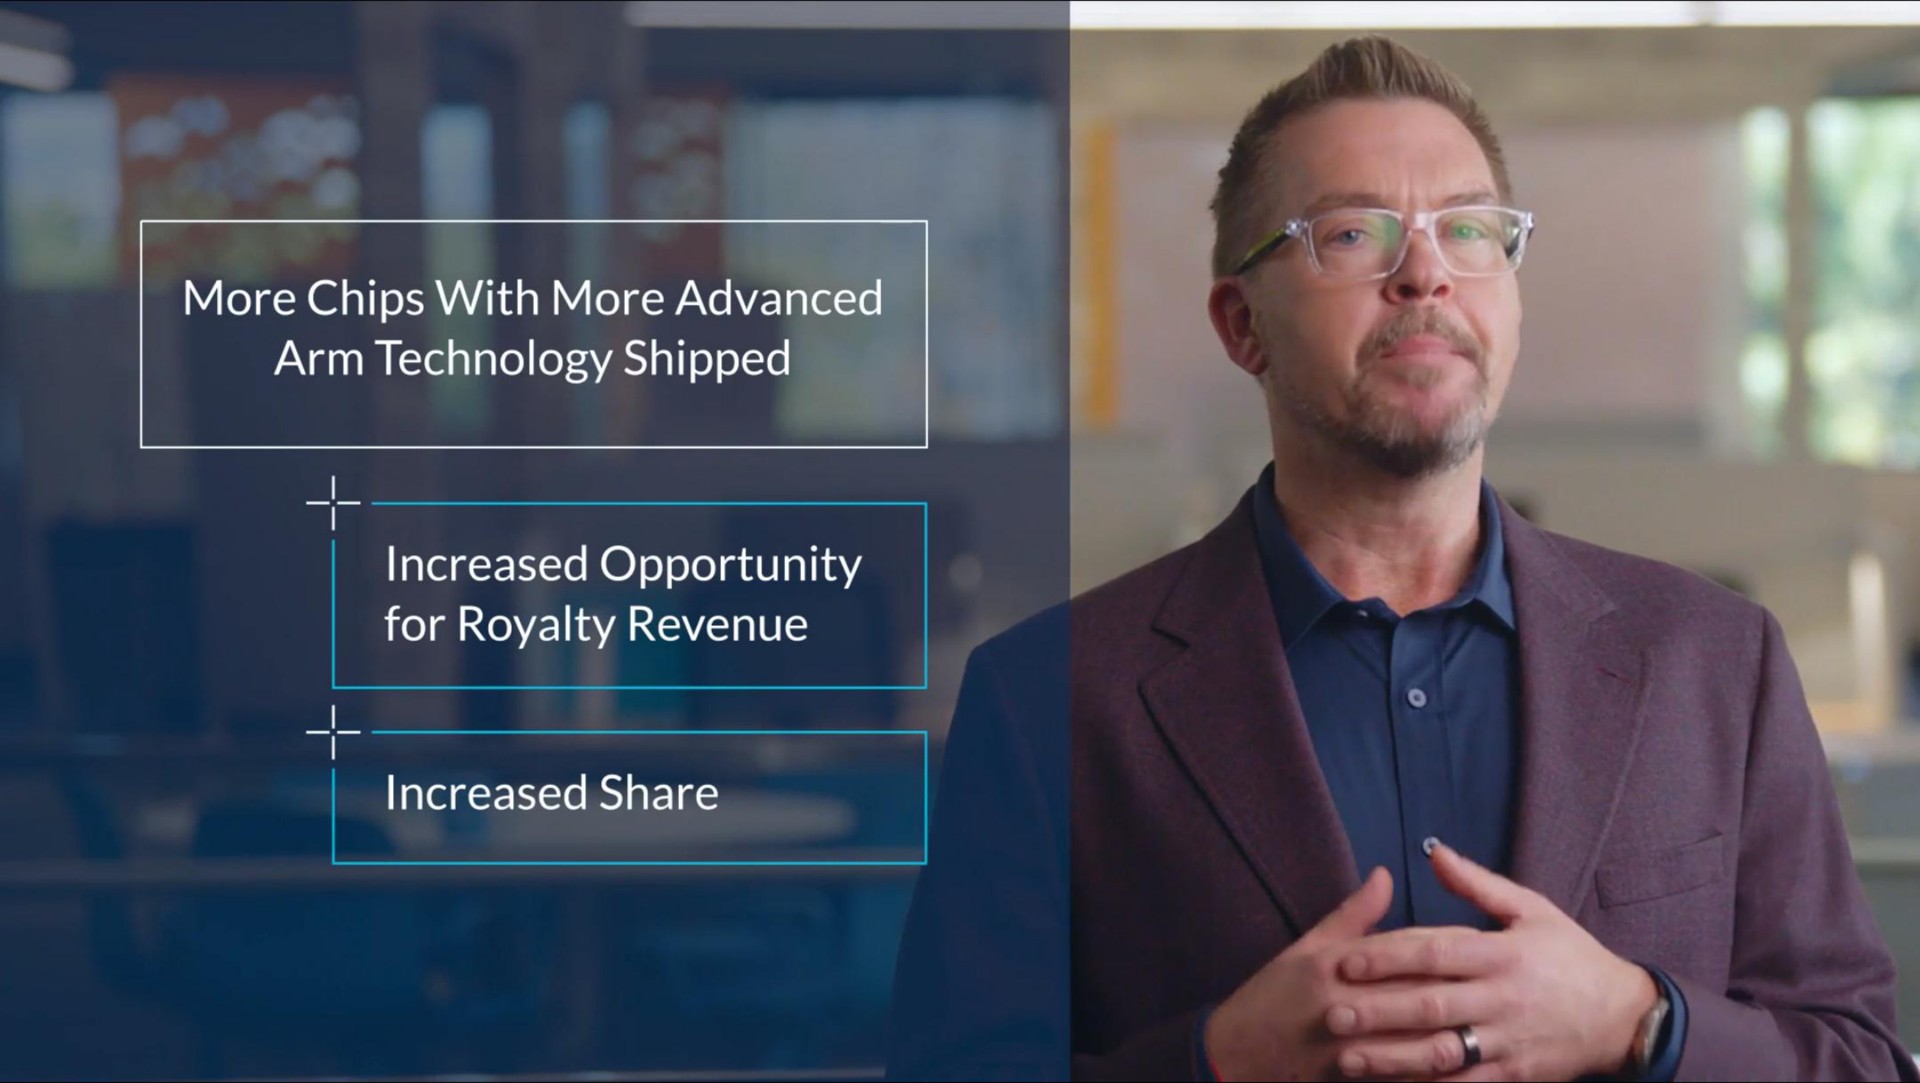 more chips arm technology shipped increased opportunity for royalty revenue increased share | arm